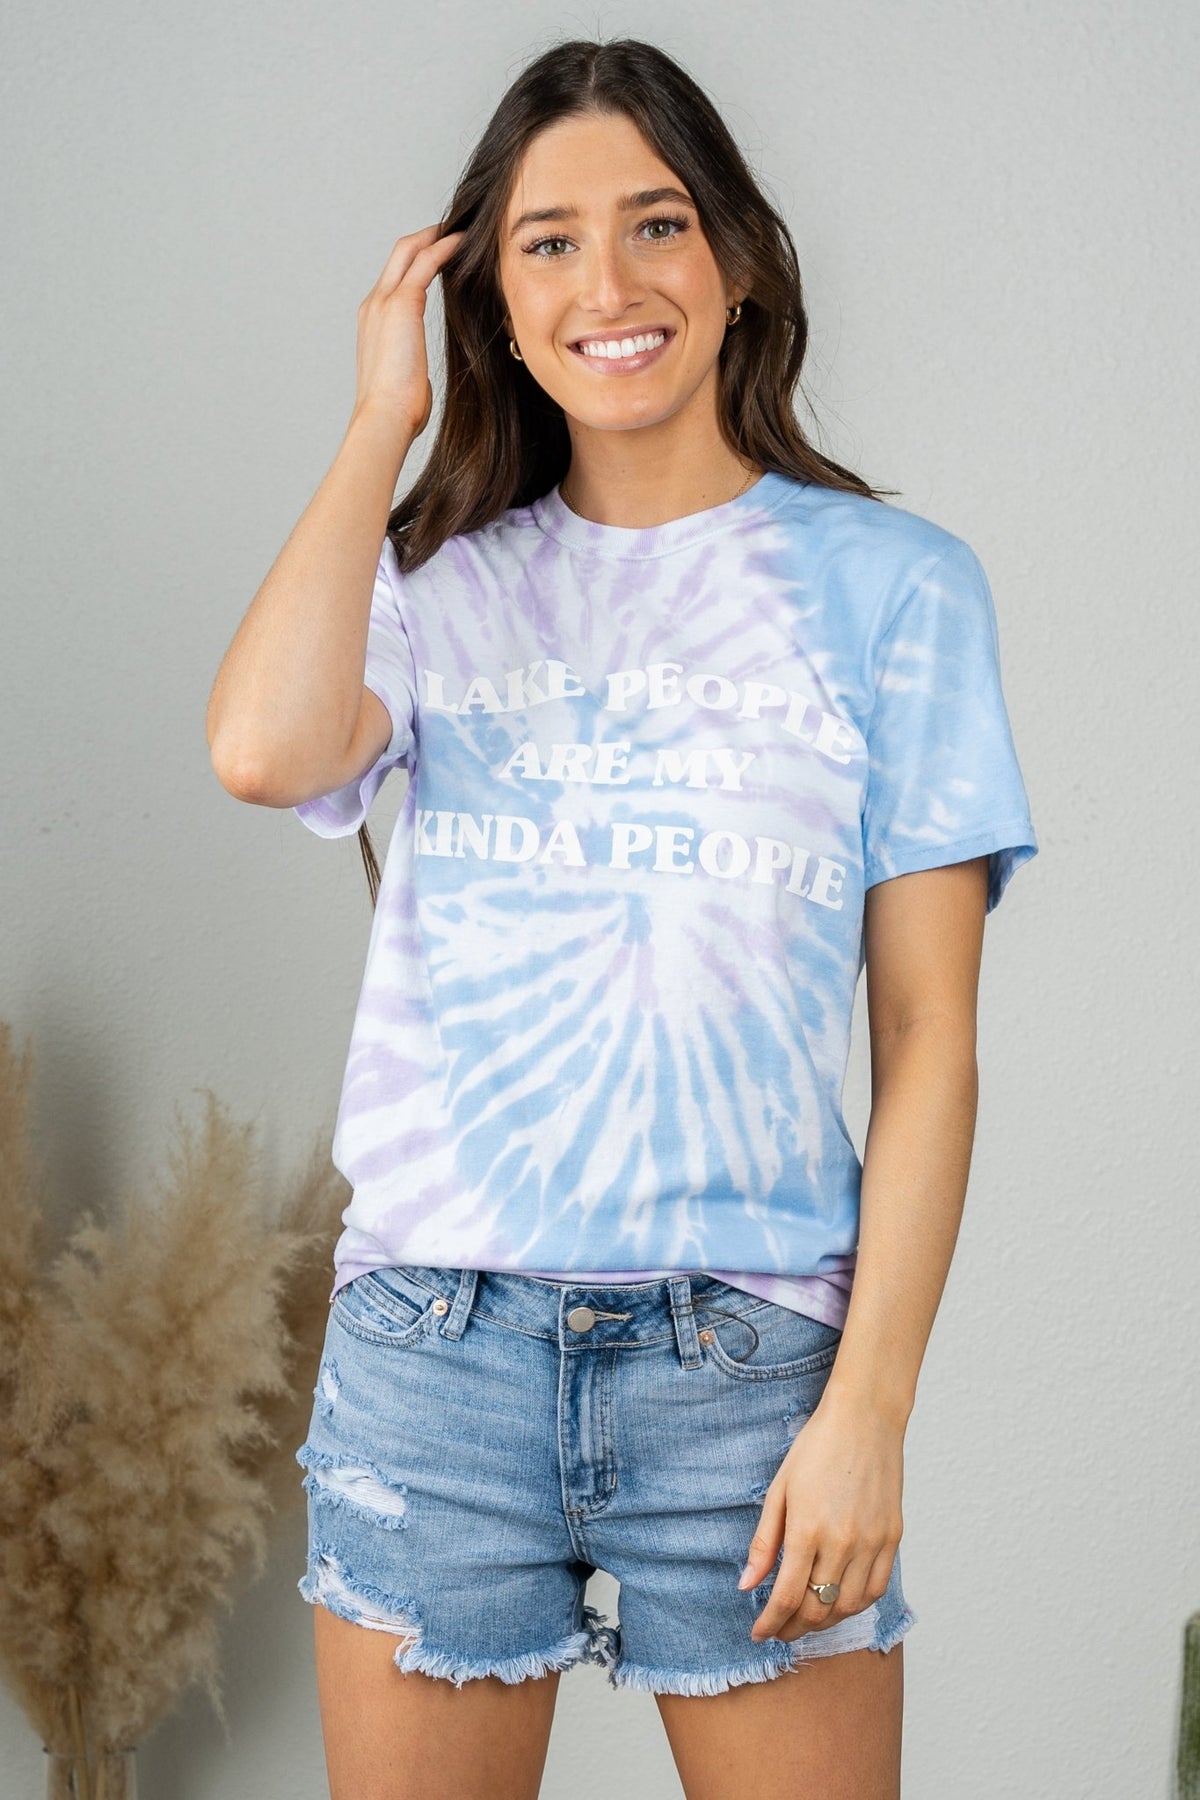 Lake people tie dye t-shirt blue/lavender - DayDreamer Graphic Band Tees at Lush Fashion Lounge Trendy Boutique in Oklahoma City